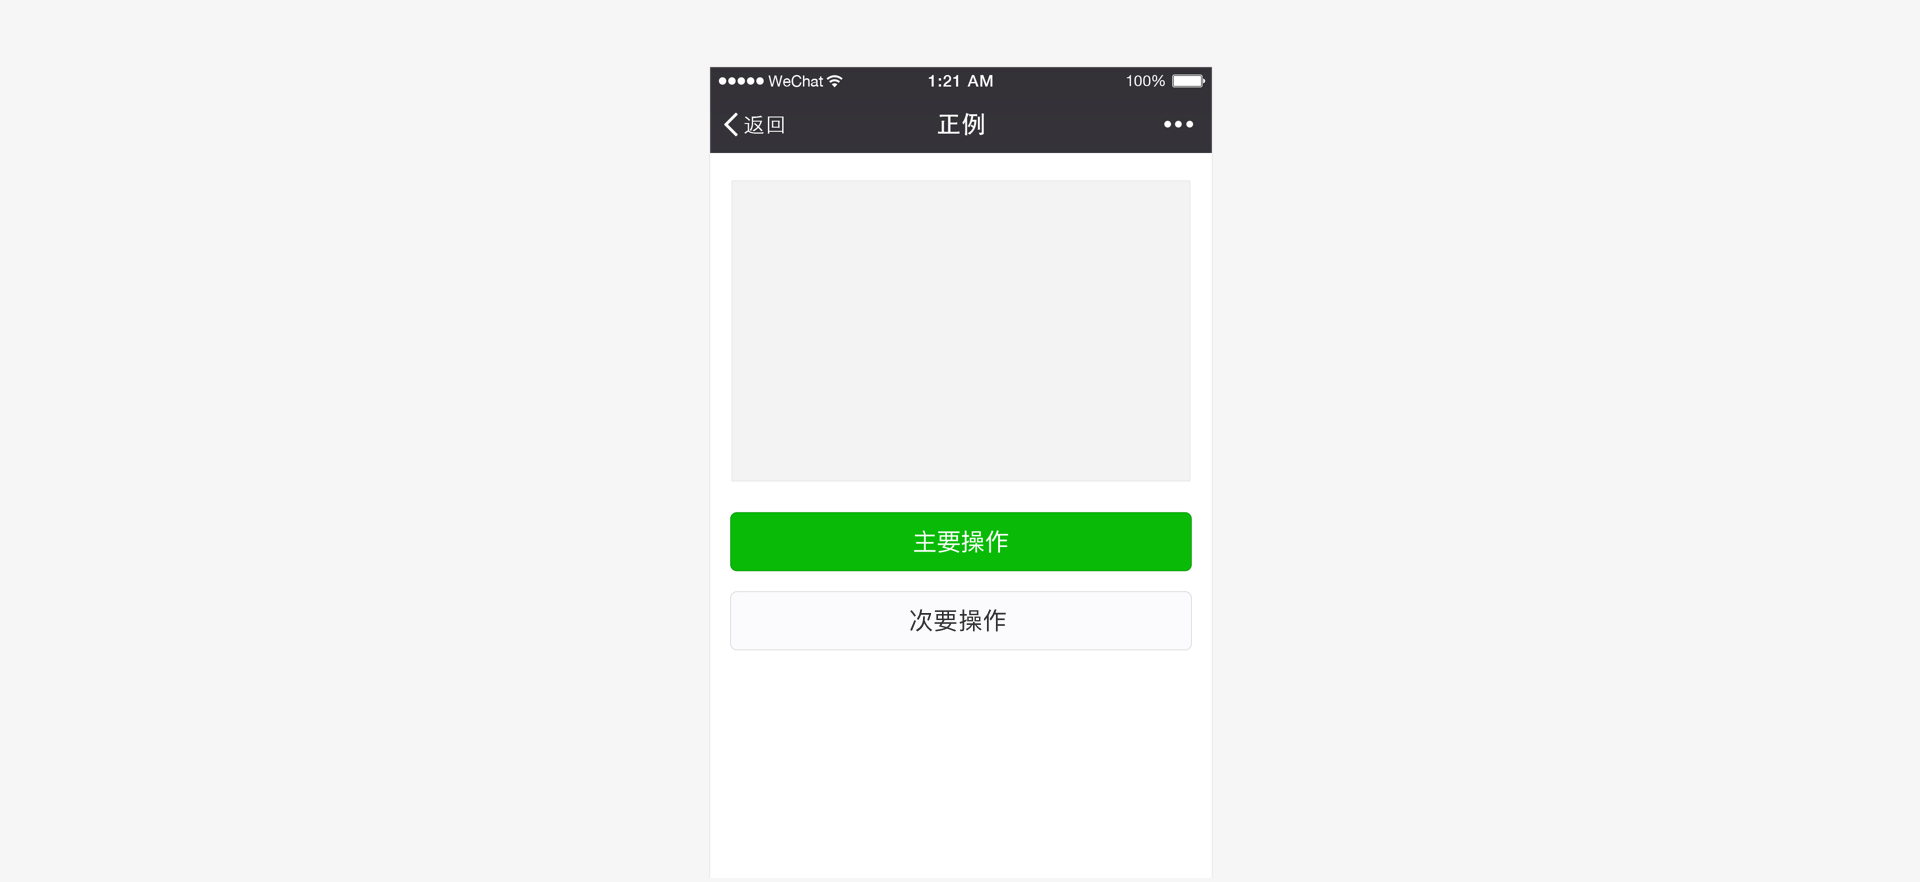 WeChat small program design specifications (1) friendly and polite